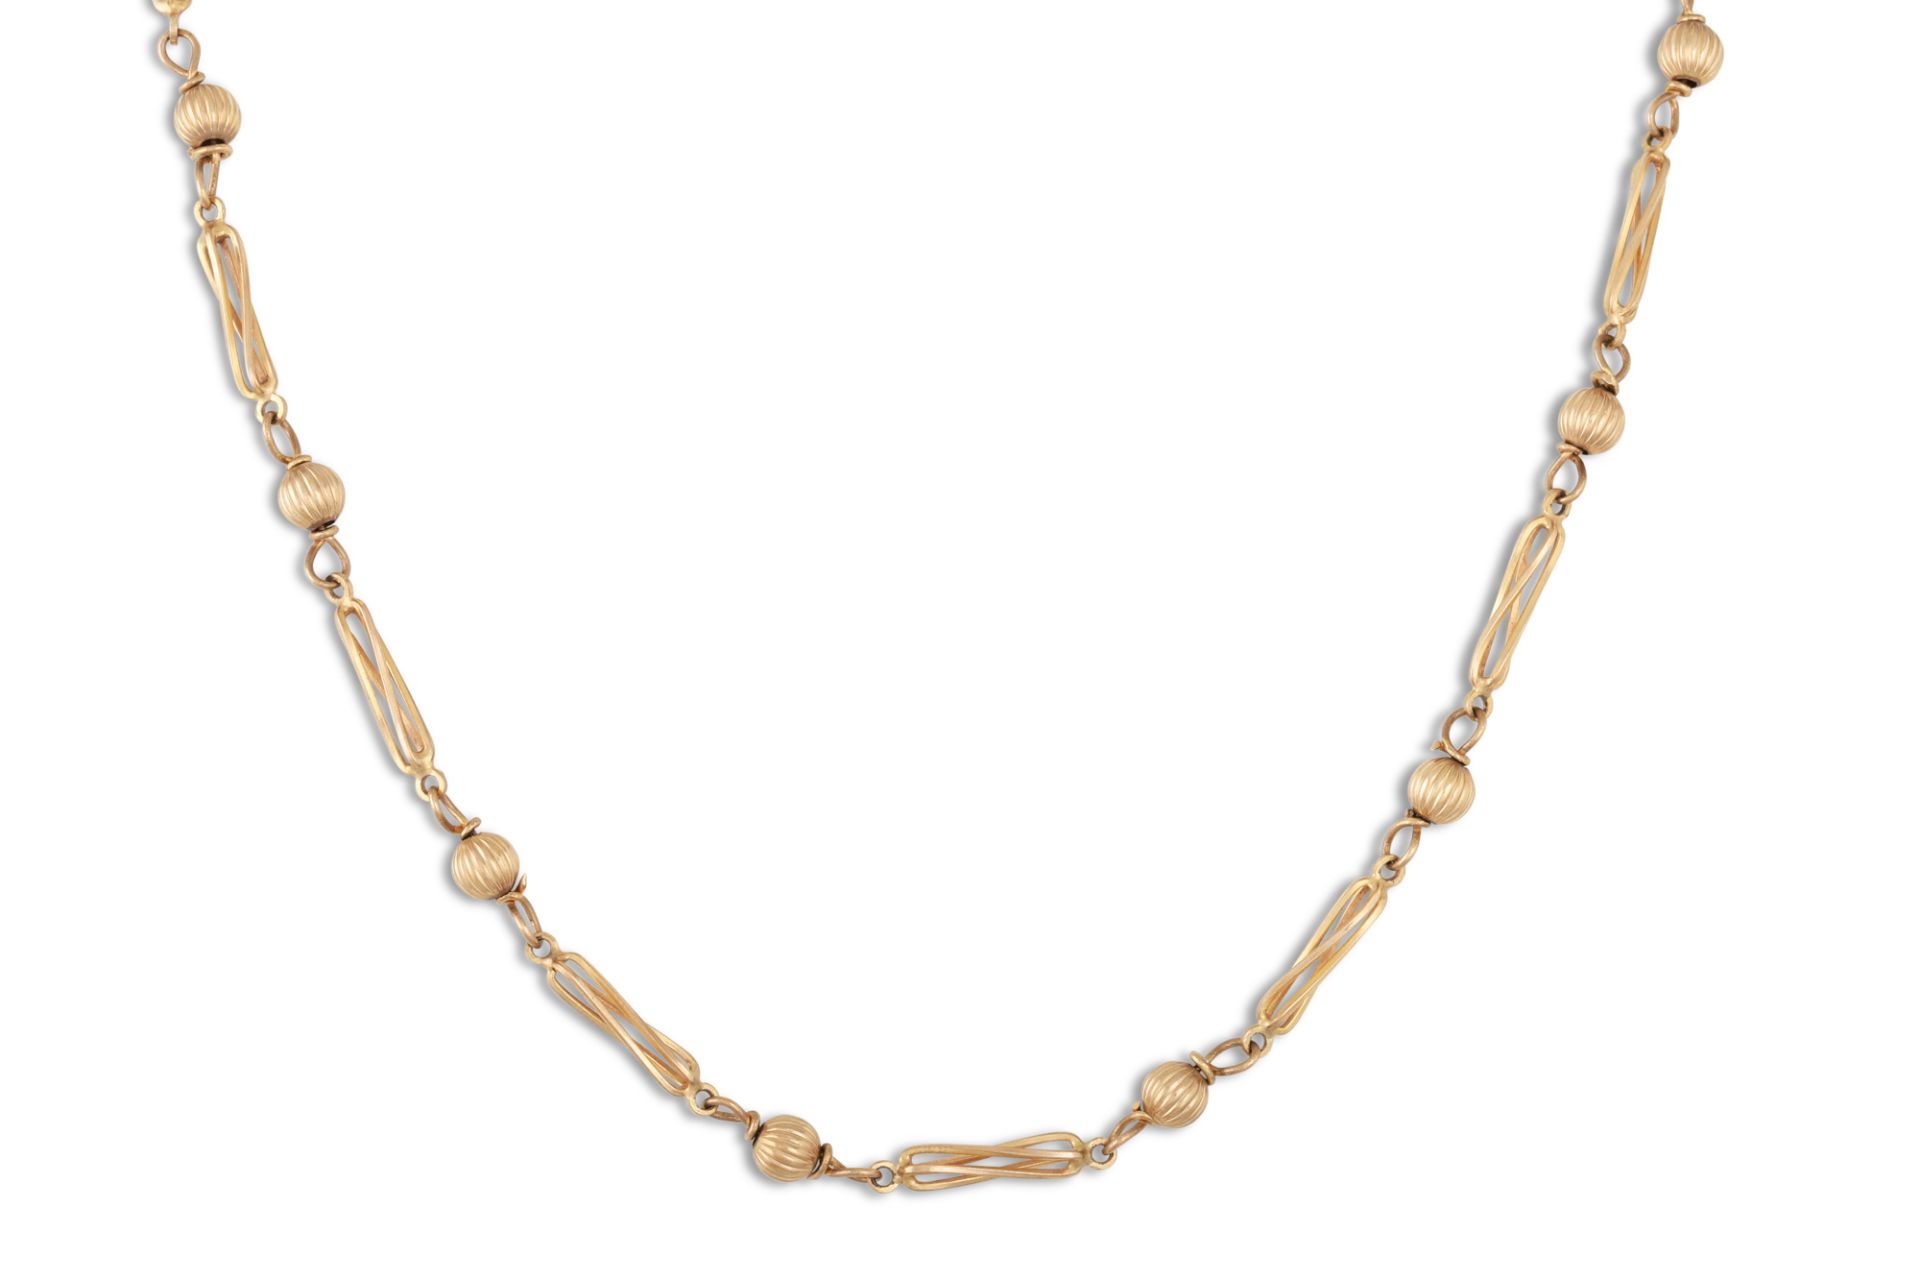 A 9CT YELLOW GOLD FANCY LINK NECK CHAIN, with beaded spacers, ca 19" long, 12.7 g.